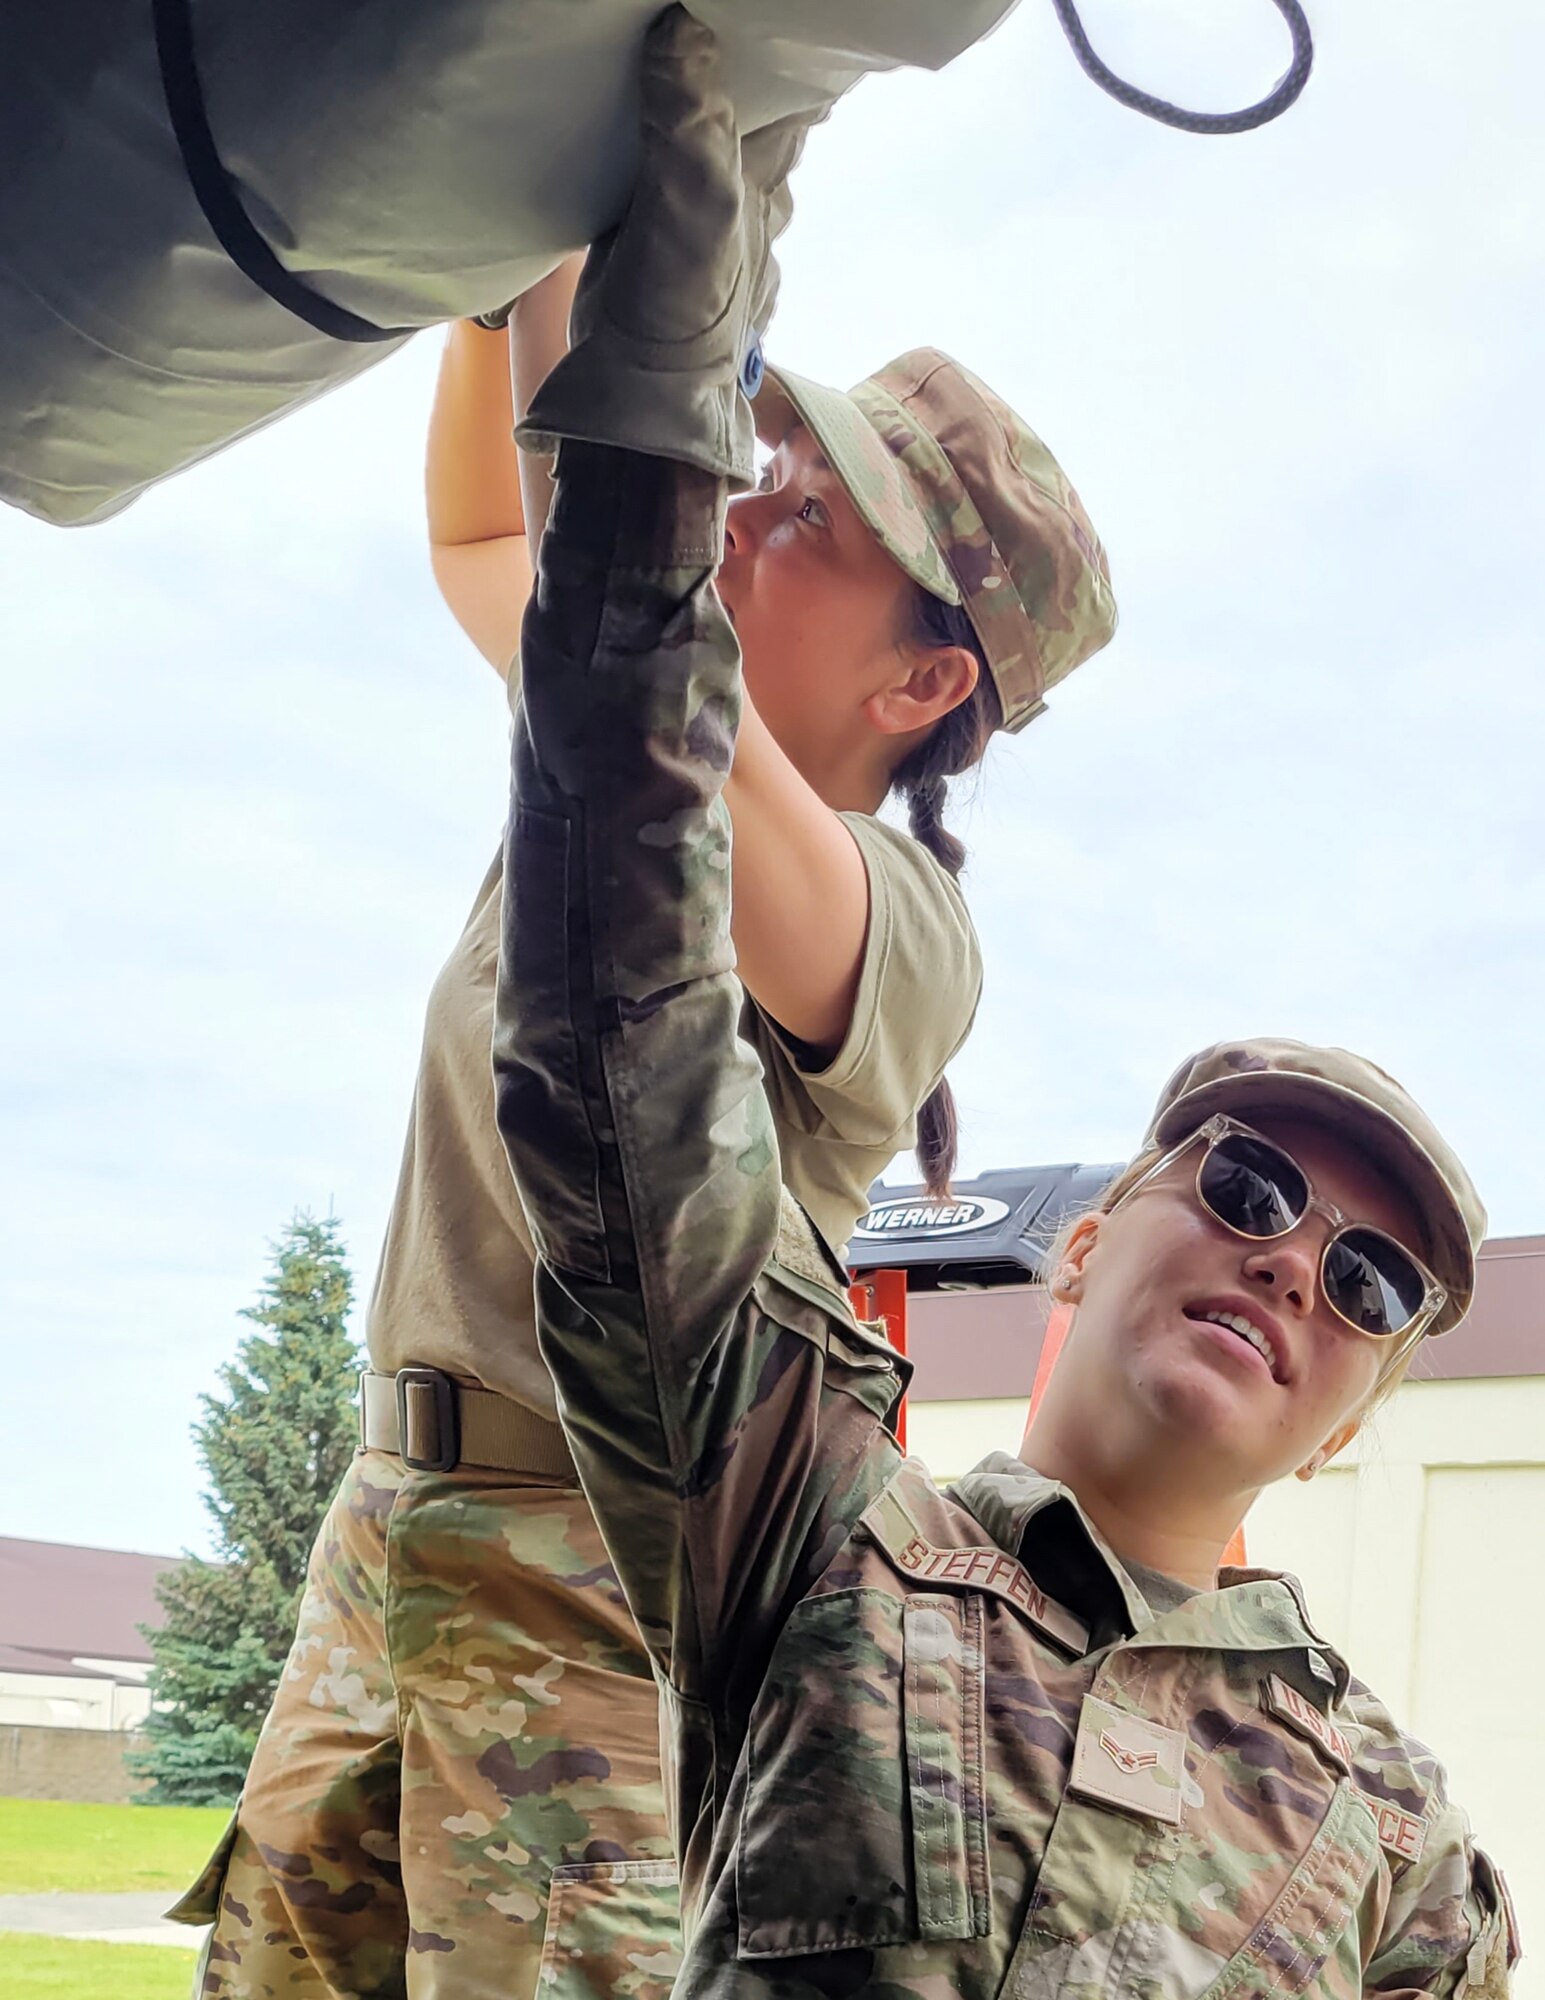 U.S. Air Force Airman 1st Class Sari Steffen, holds up a part of the Alaska Small Shelter System while Tech. Sgt. TSgt Dieuhuyen Johnson, left, secures it in place at Joint Base Elmendorf-Richardson, Alaska, July 26, 2023.